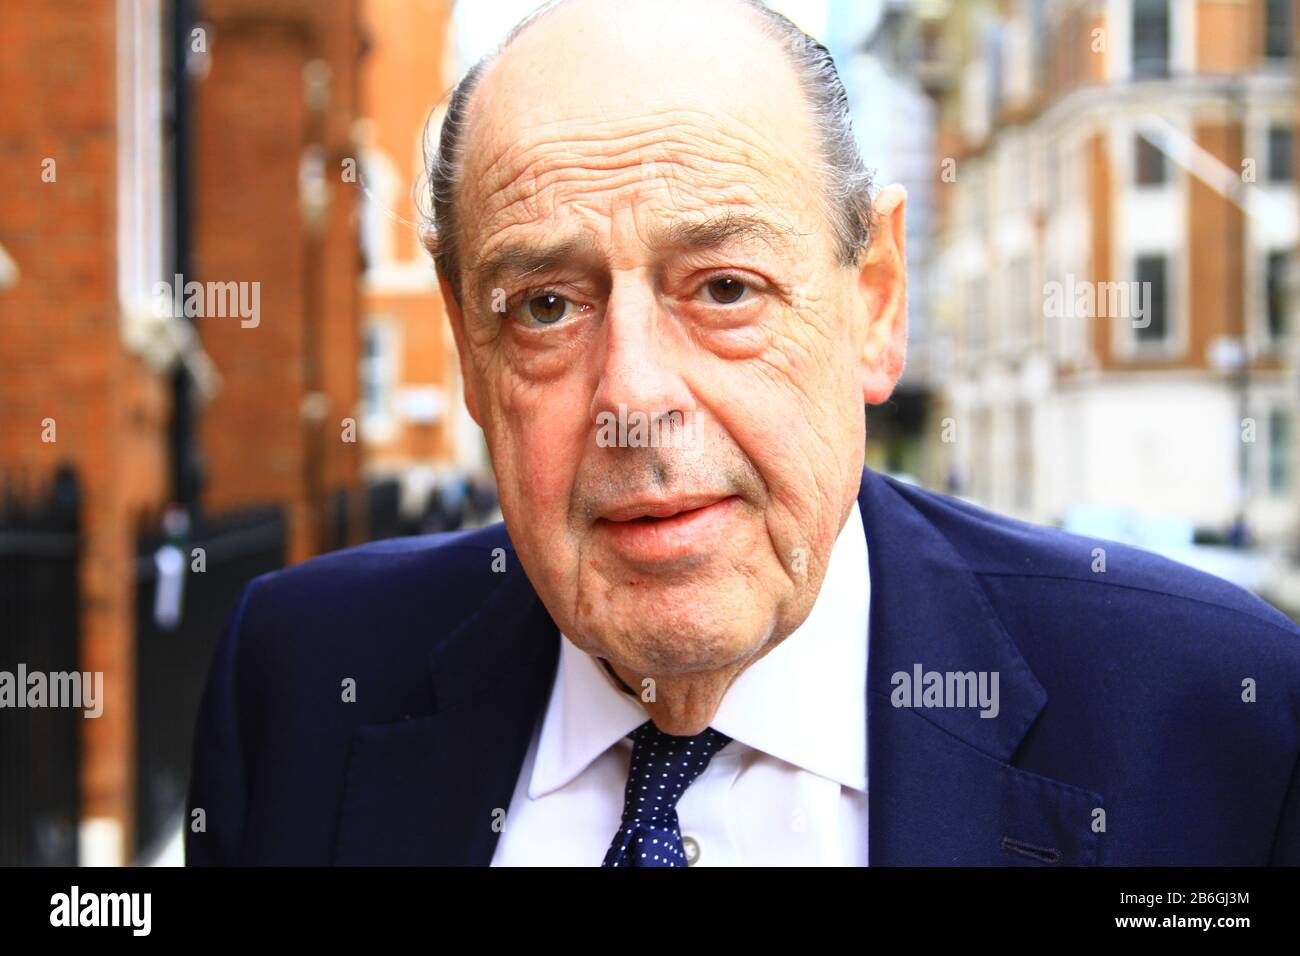 Nicholas Soames. Baron Soames in Westminster on 10th March 2020. Sir Arthur Nicholas Winston Soames Grandson of Sir Winston Churchill. Lord Soames. Member of the House of Lords. Russell Moore portfolio page. Famous politicians. Stock Photo